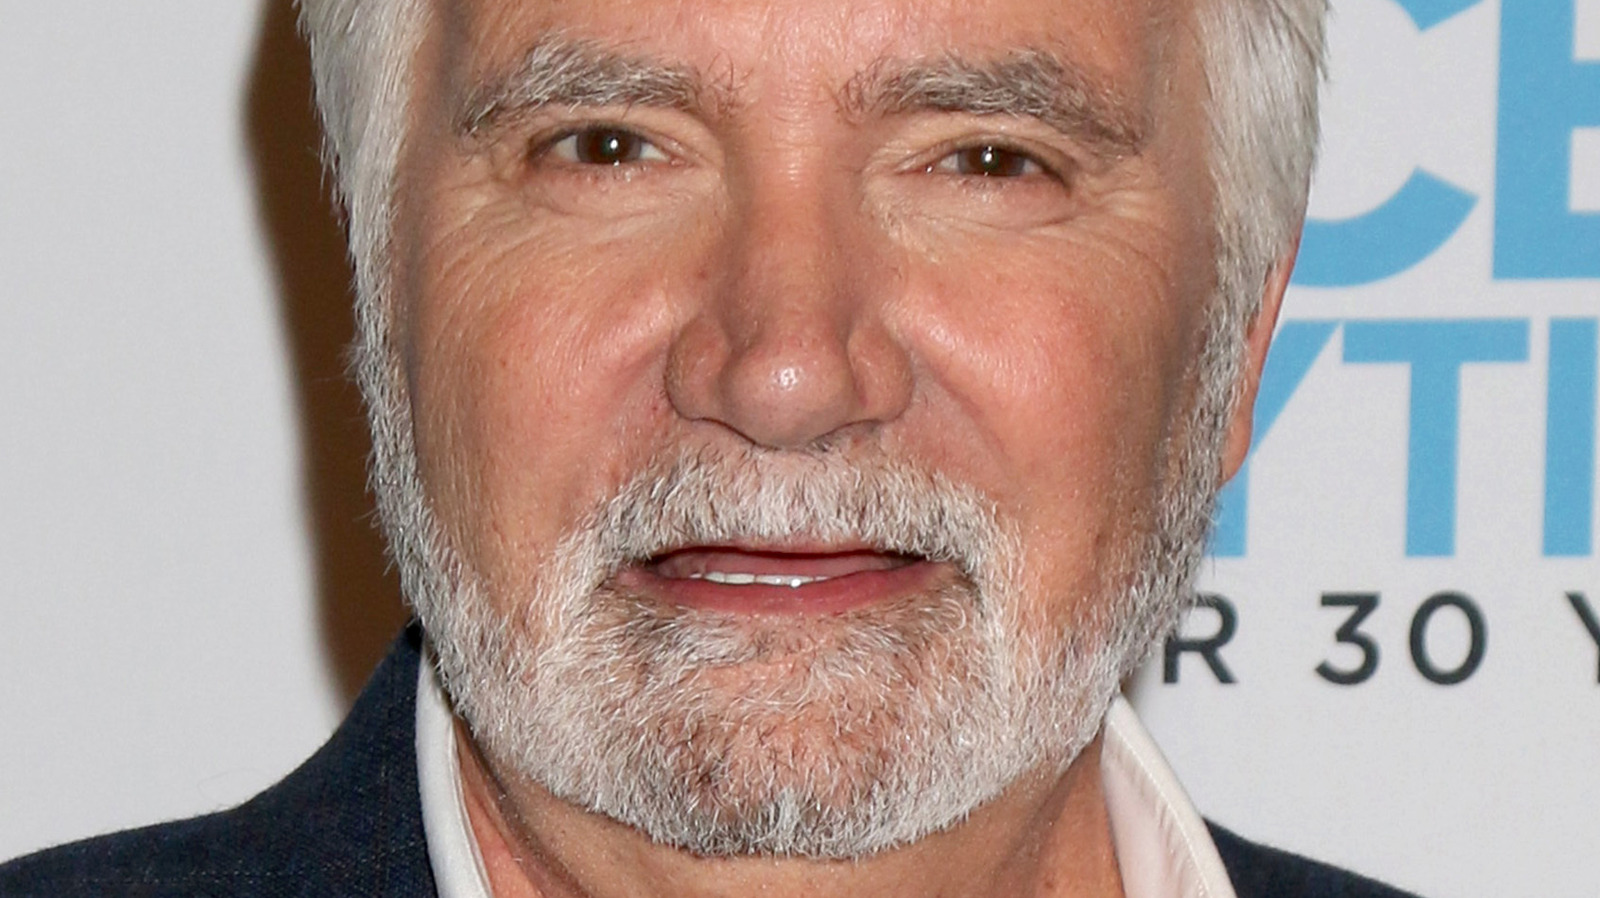 Why The Bold And The Beautiful's John McCook Dyed His Hair To Play Eric